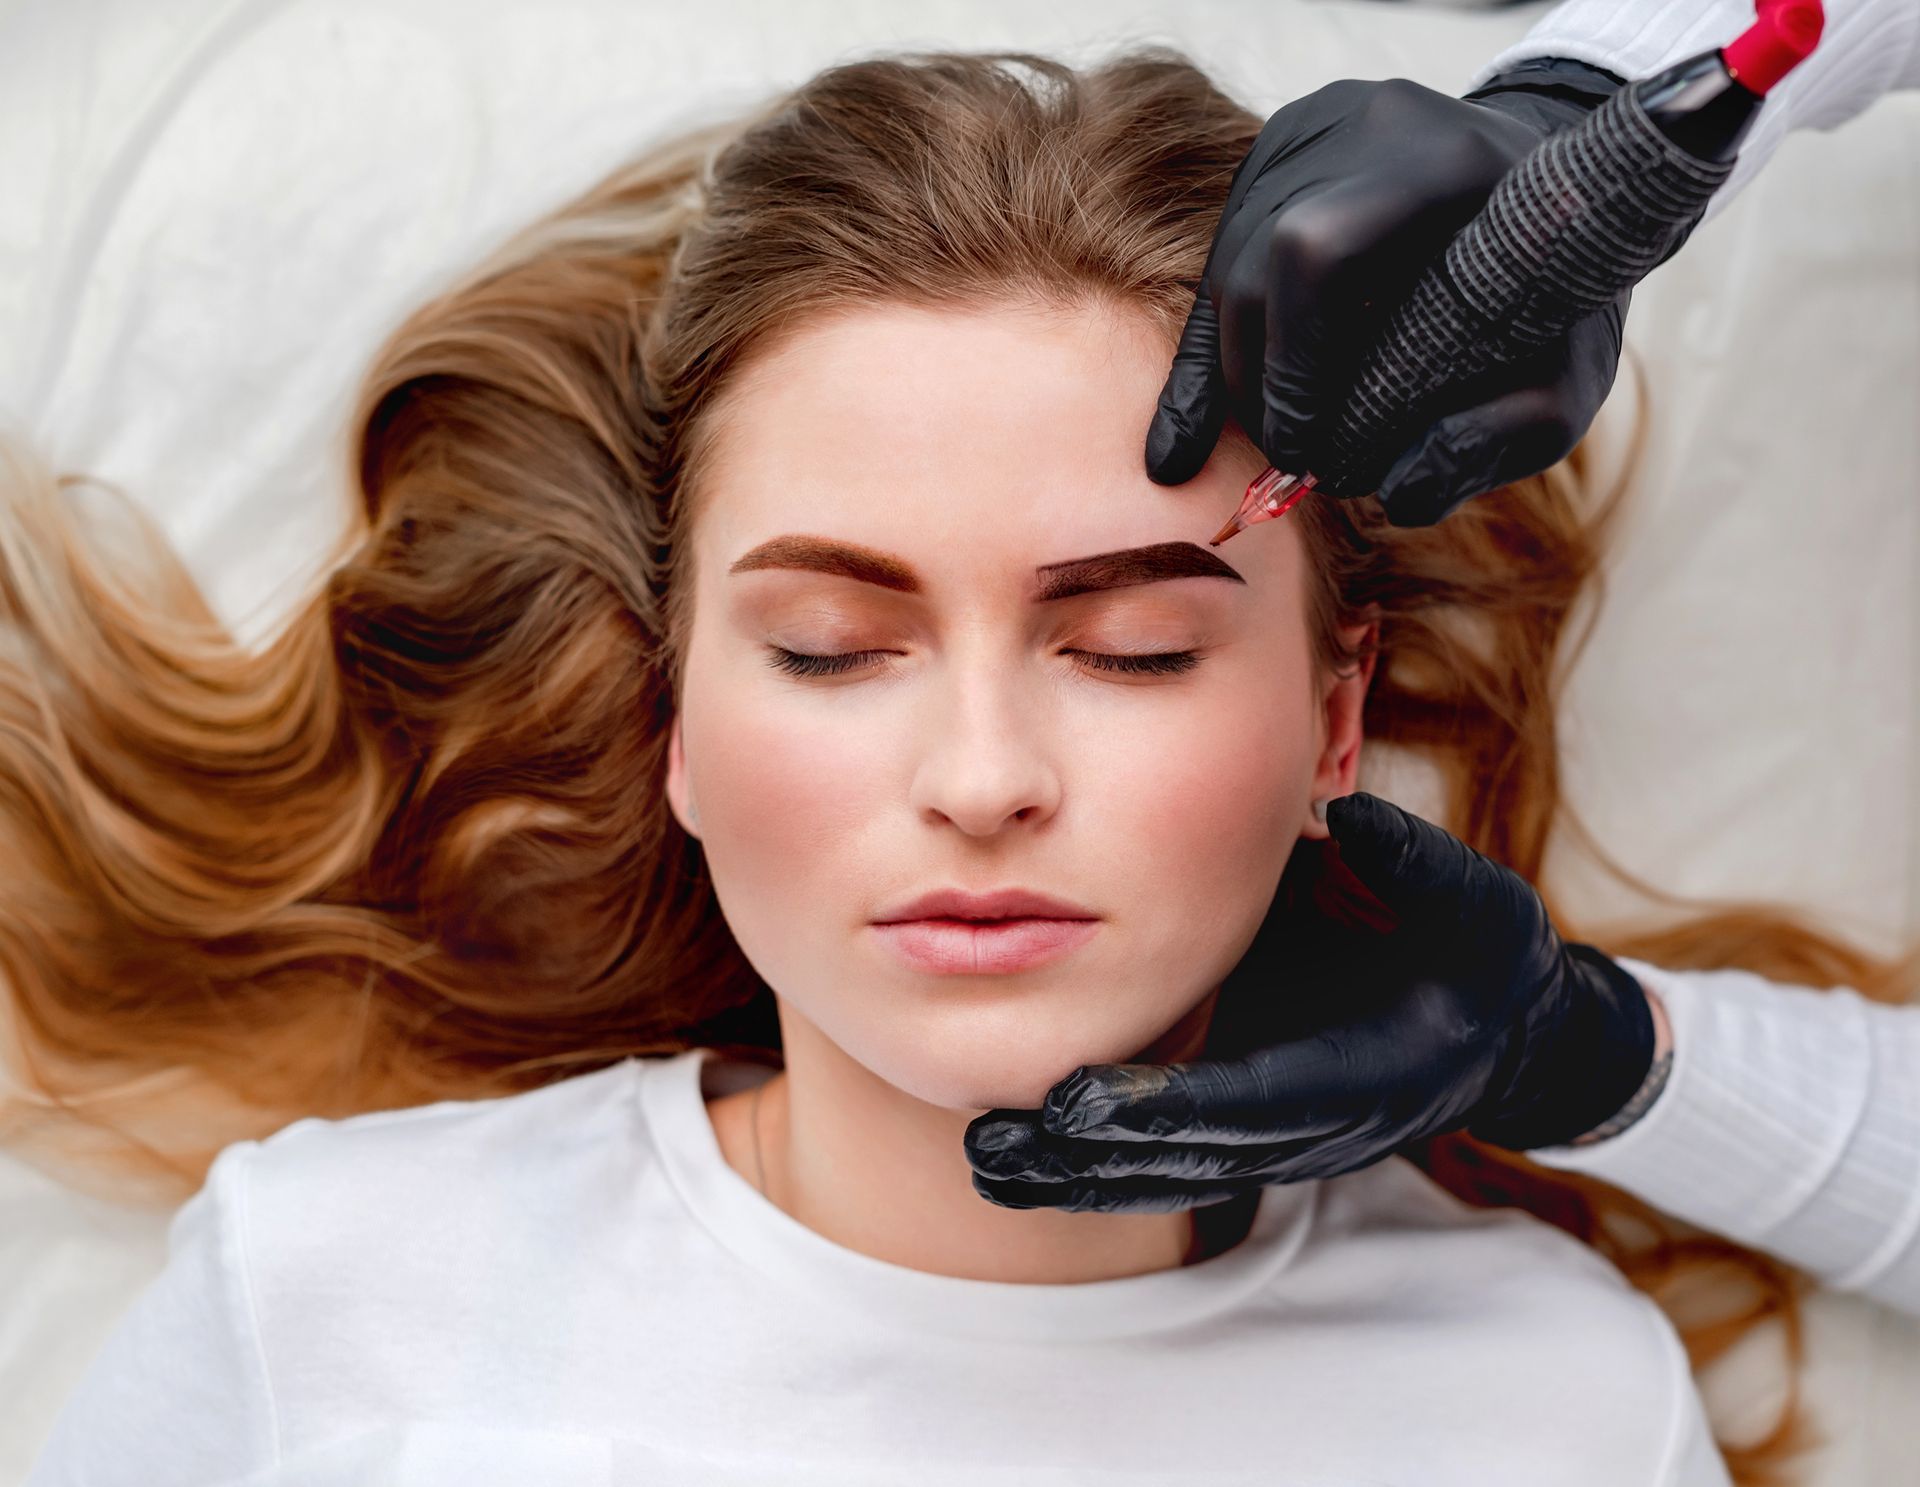 a woman is getting her eyebrows tattooed by a person wearing black gloves